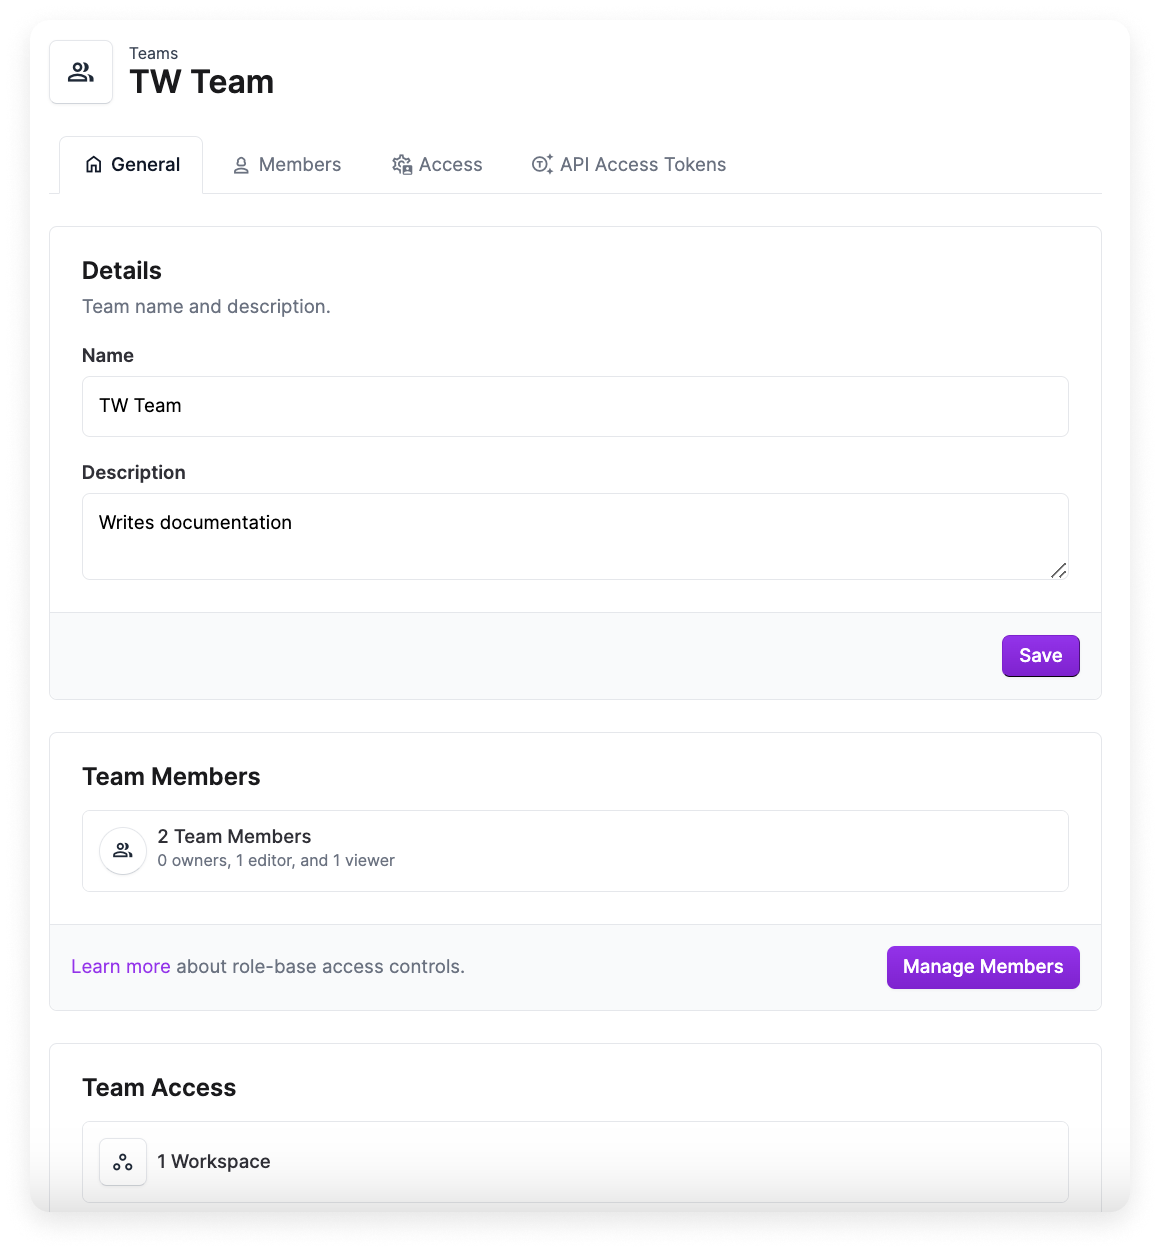 Team management tabs and options